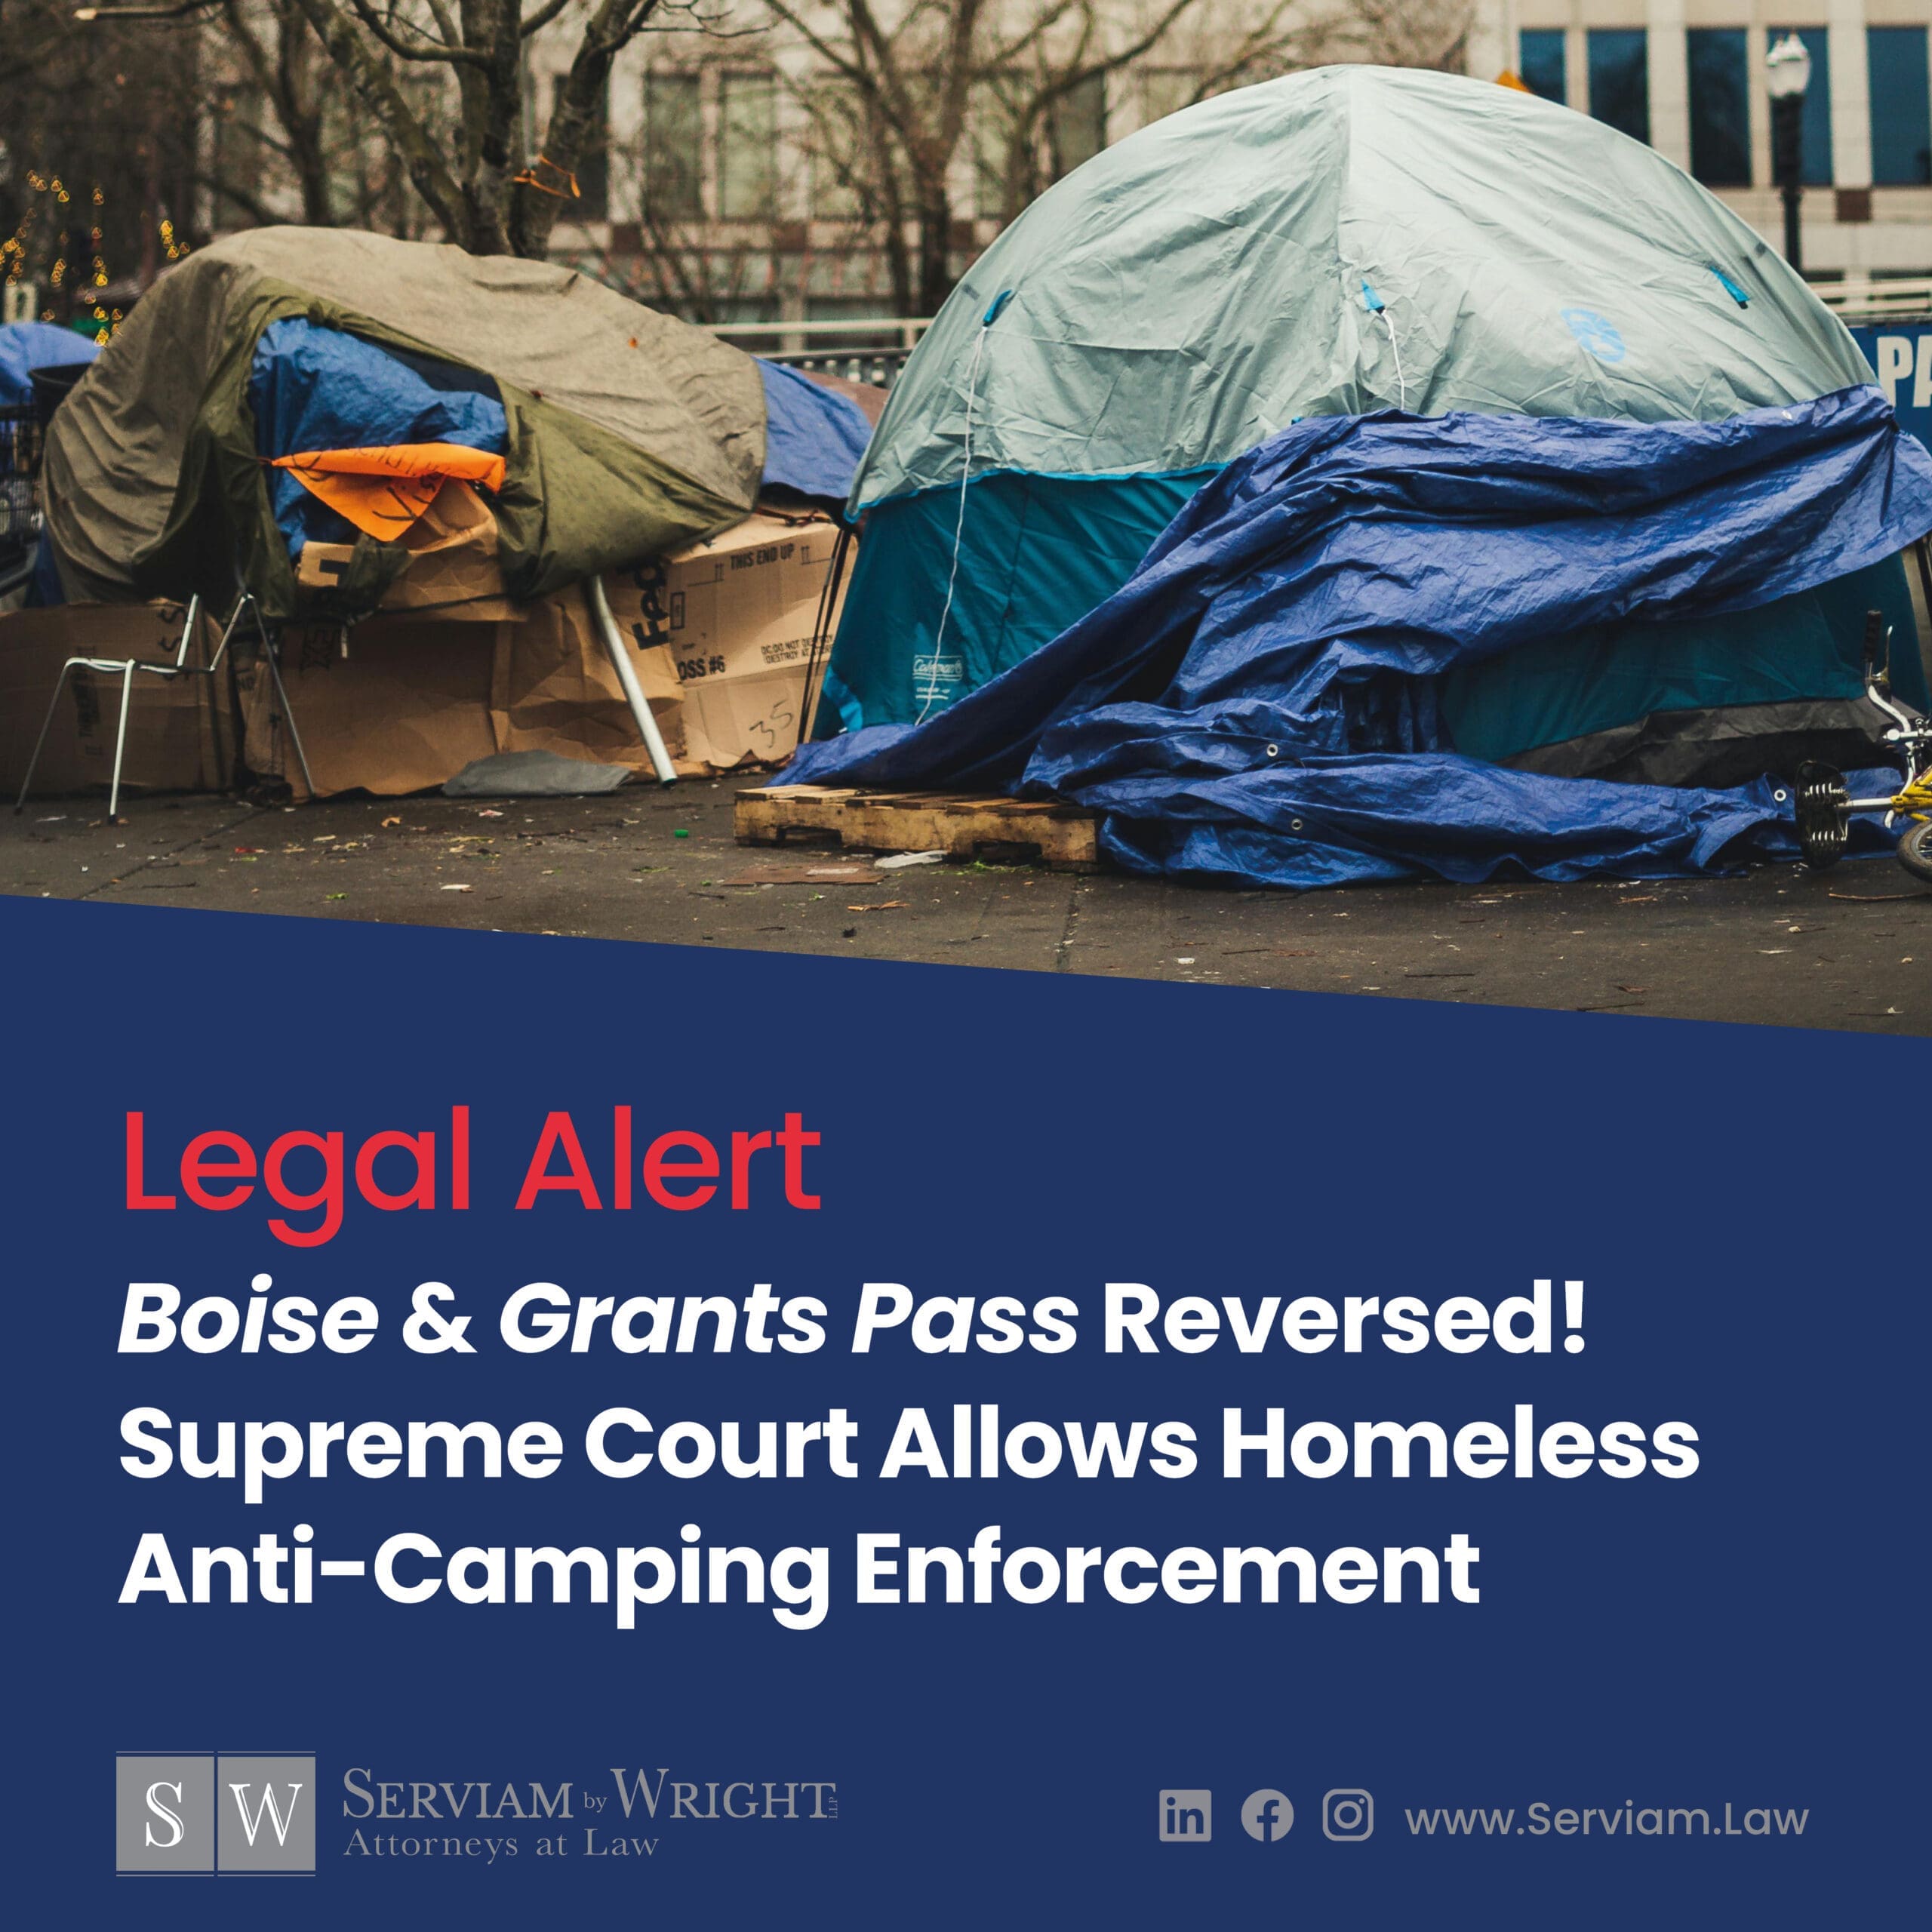 Boise & Grants Pass Reversed!  Supreme Court allows homeless anti-camping enforcement